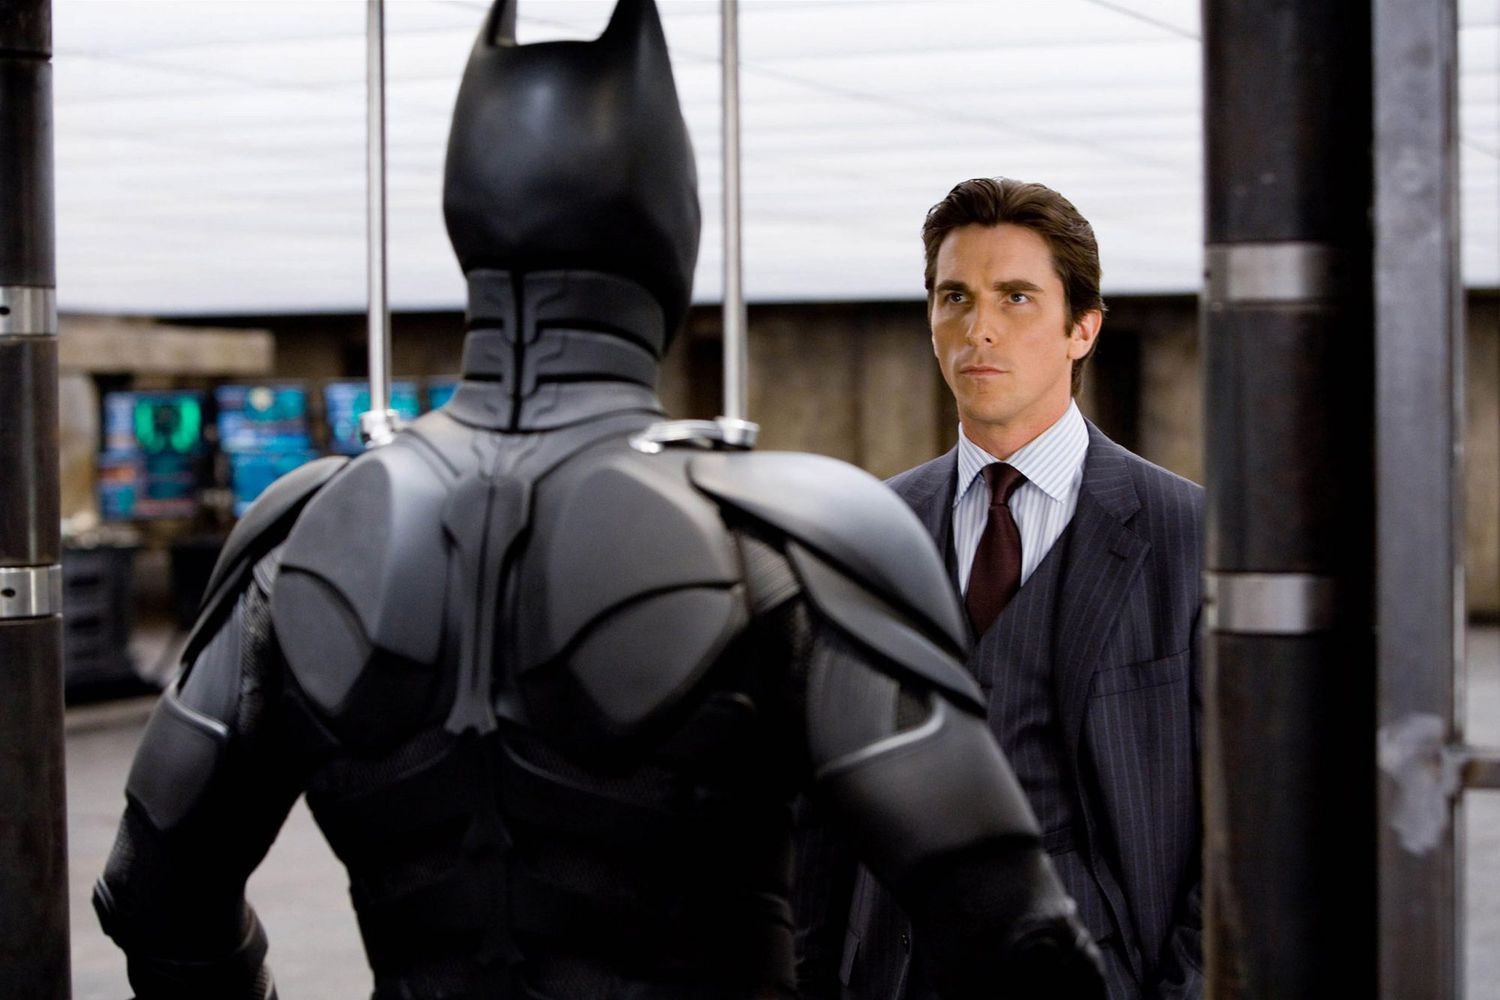 Christian Bale in The Dark Knight trilogy